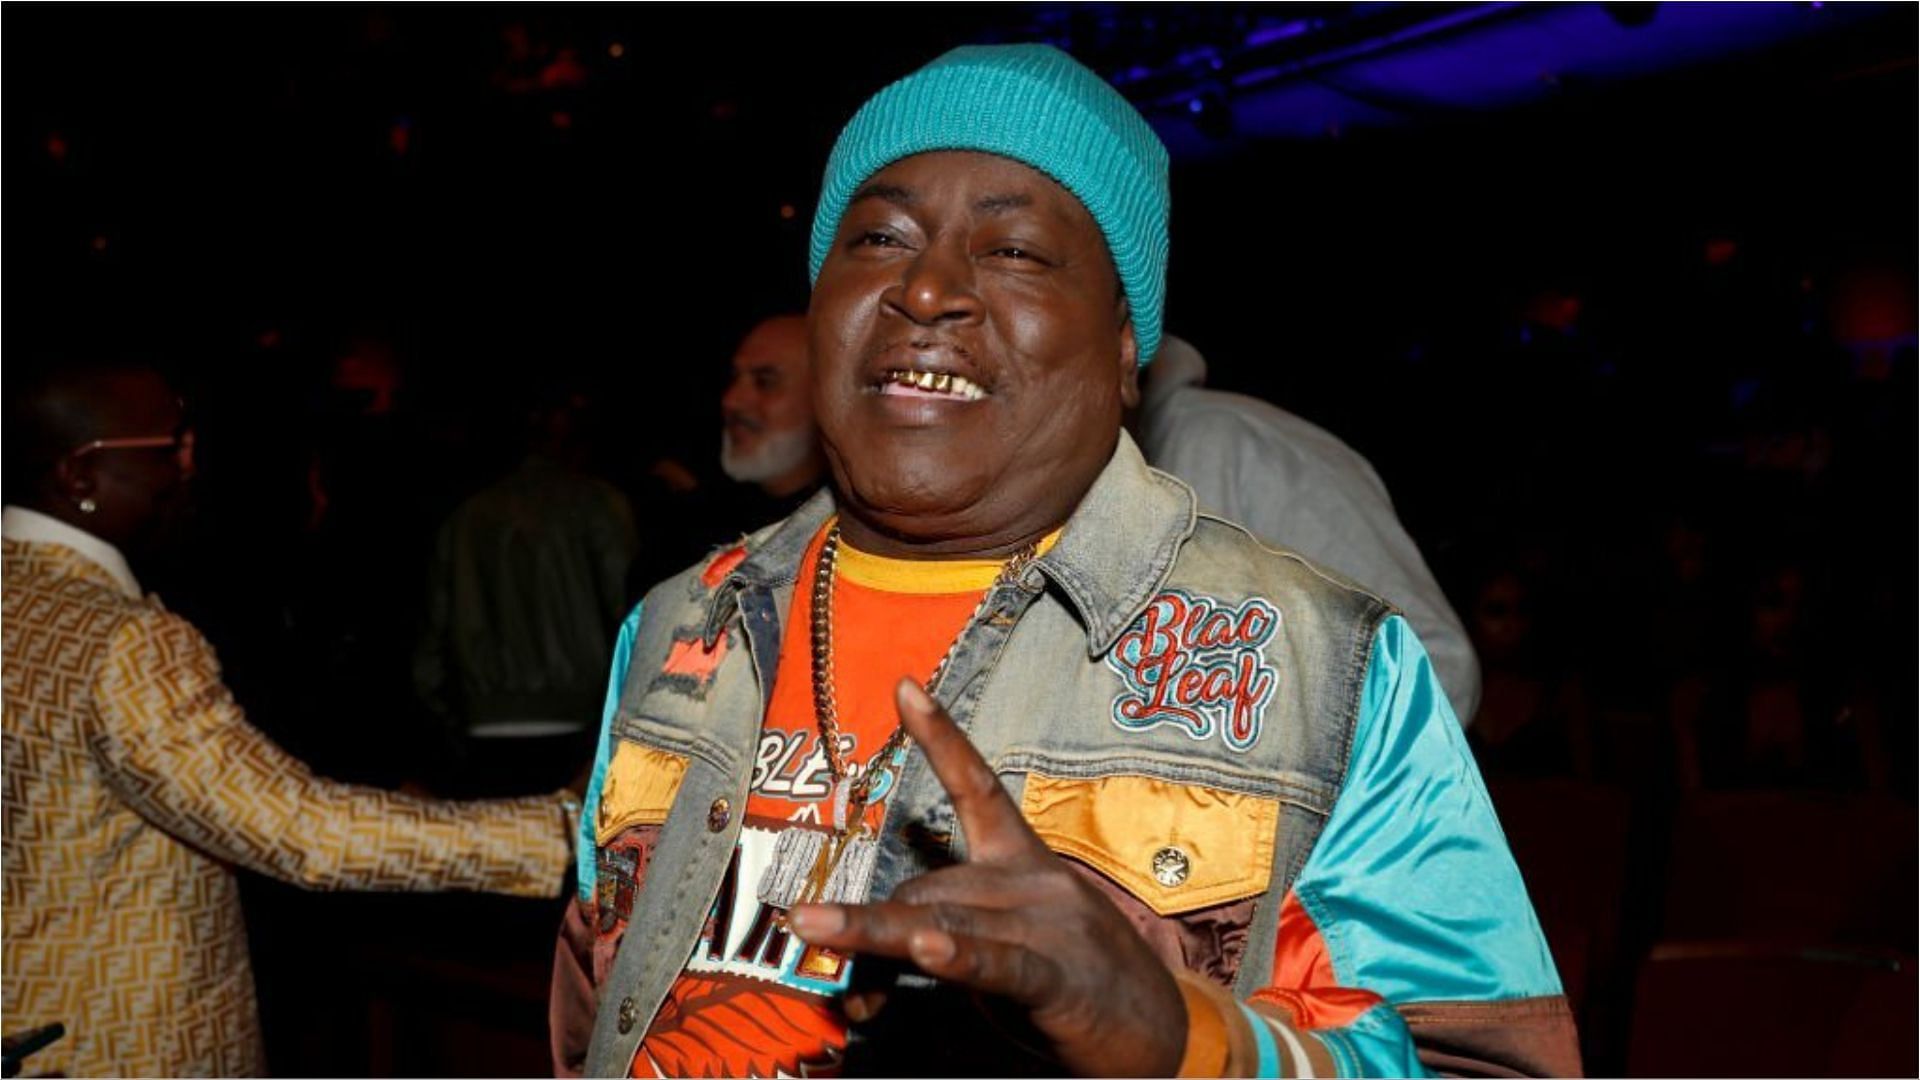 Trick Daddy has replaced his gold teeth after 30 years (Image via Johnny Nunez/Getty Images)